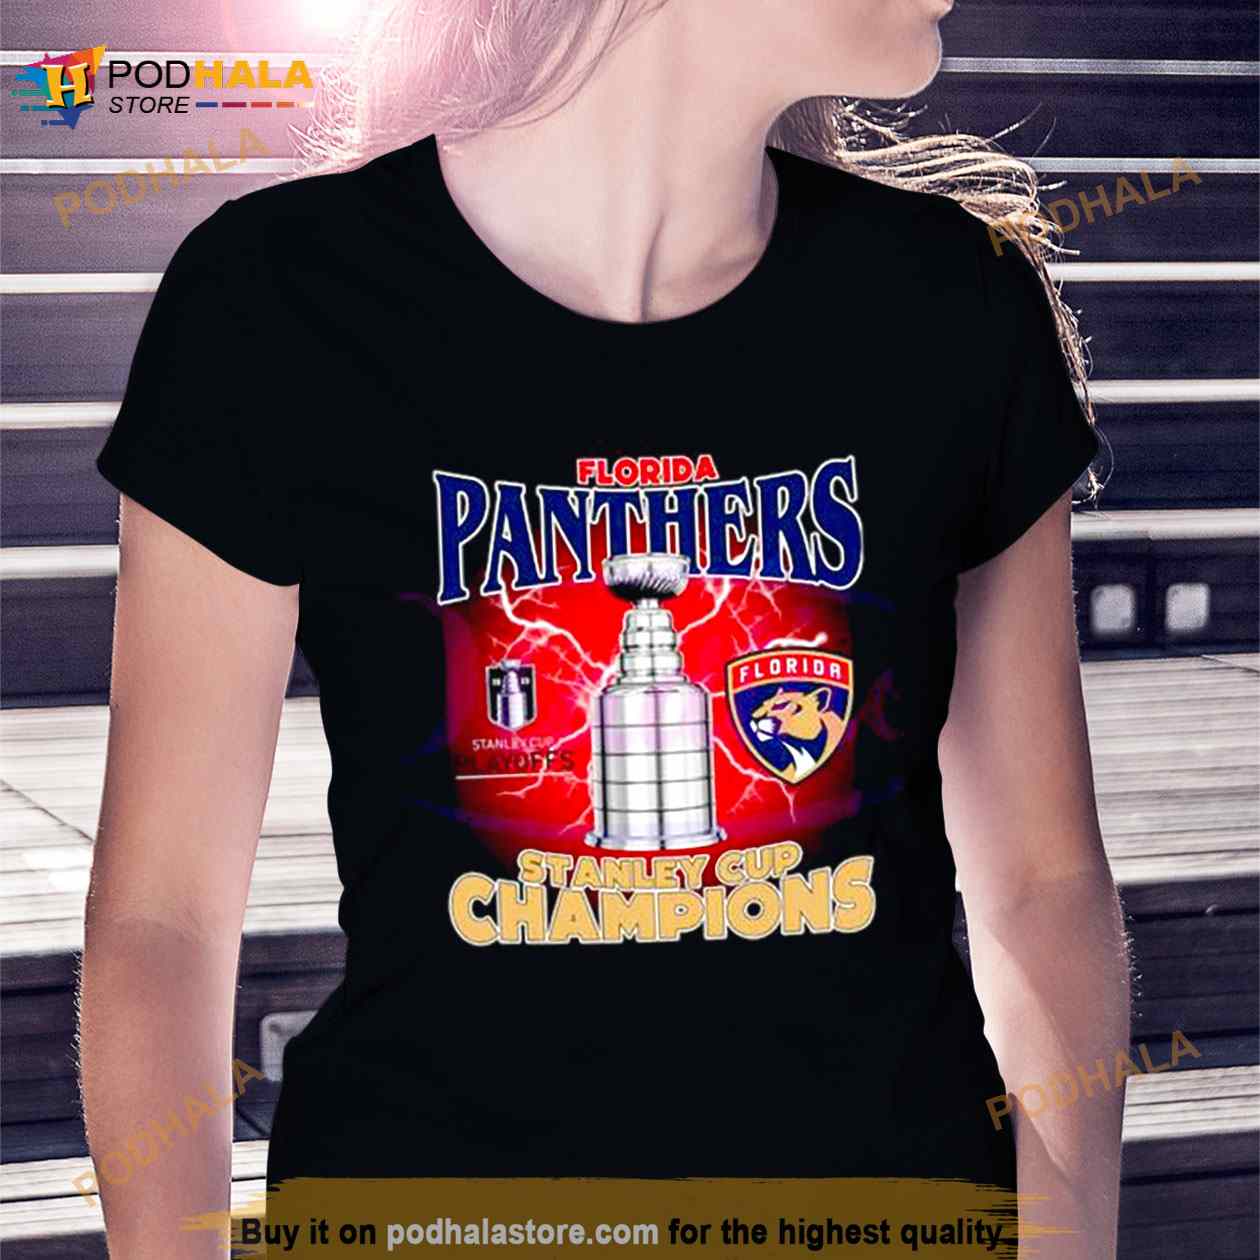 panthers clothing cheap